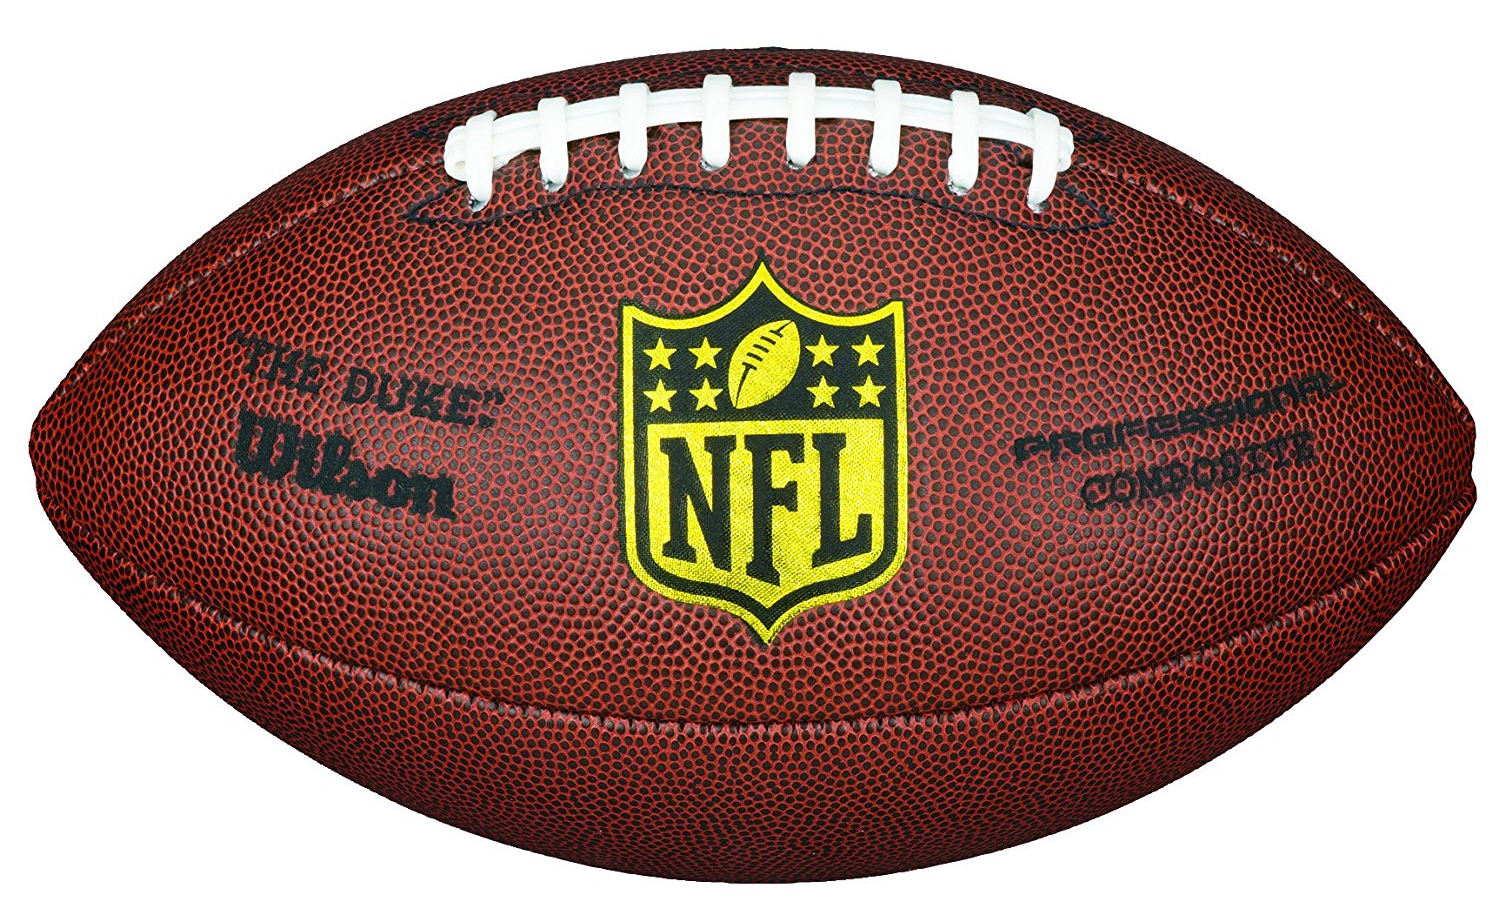 Wilson NFL Pro Replica Football Only $13.49!